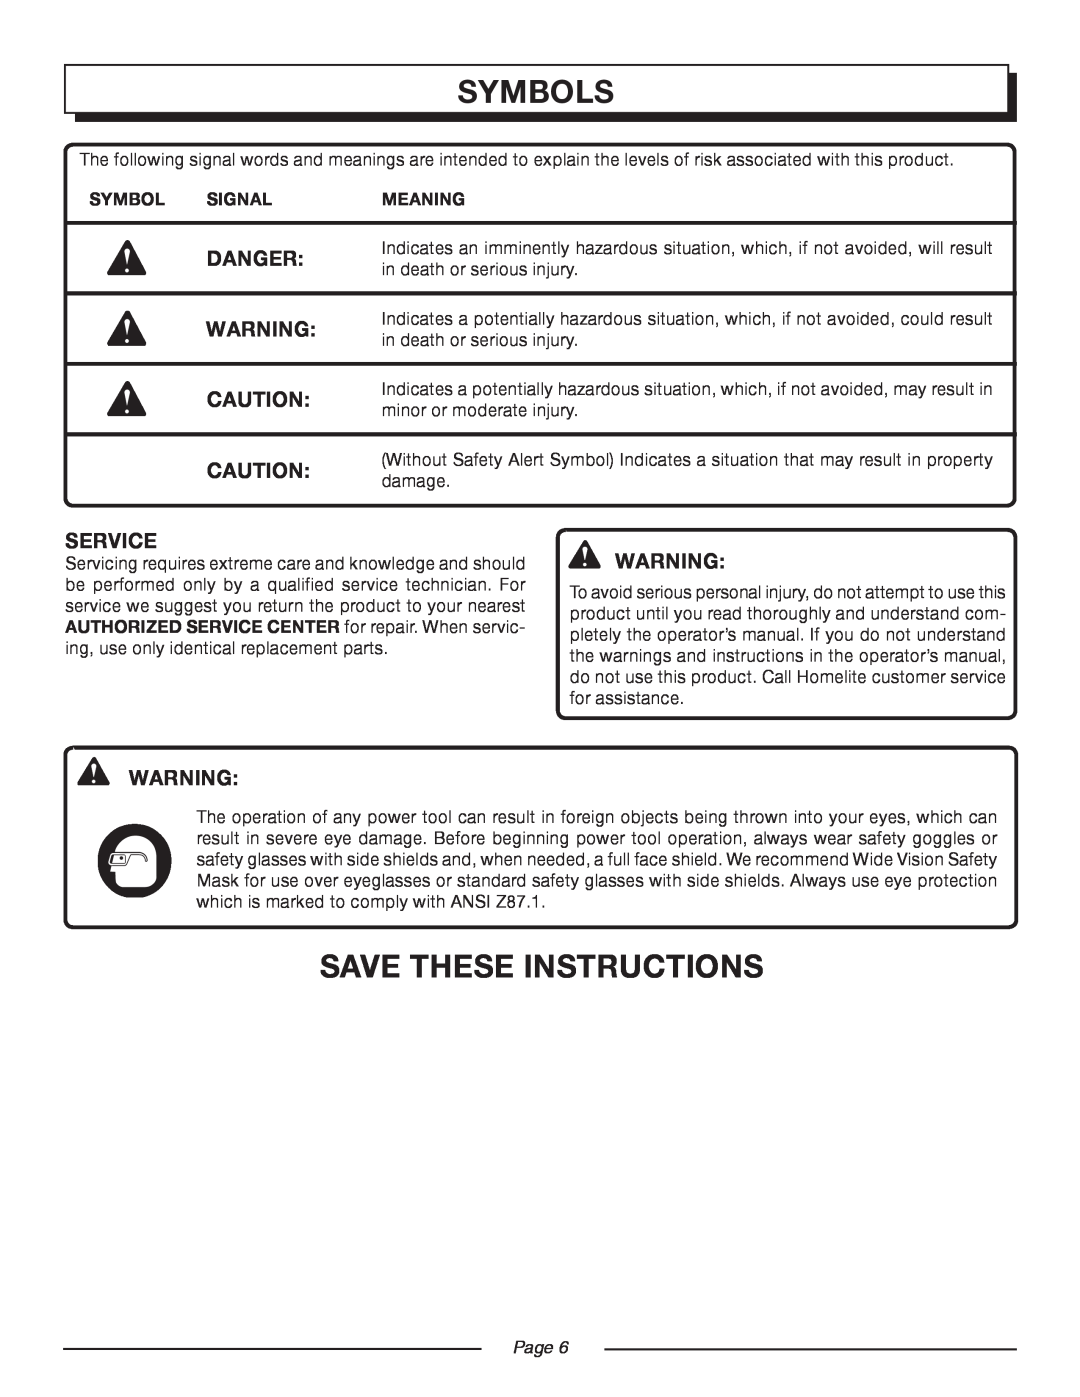 Homelite UT 44100 manual Save These Instructions, Danger, Service, Symbols, Signal, Meaning, Page  